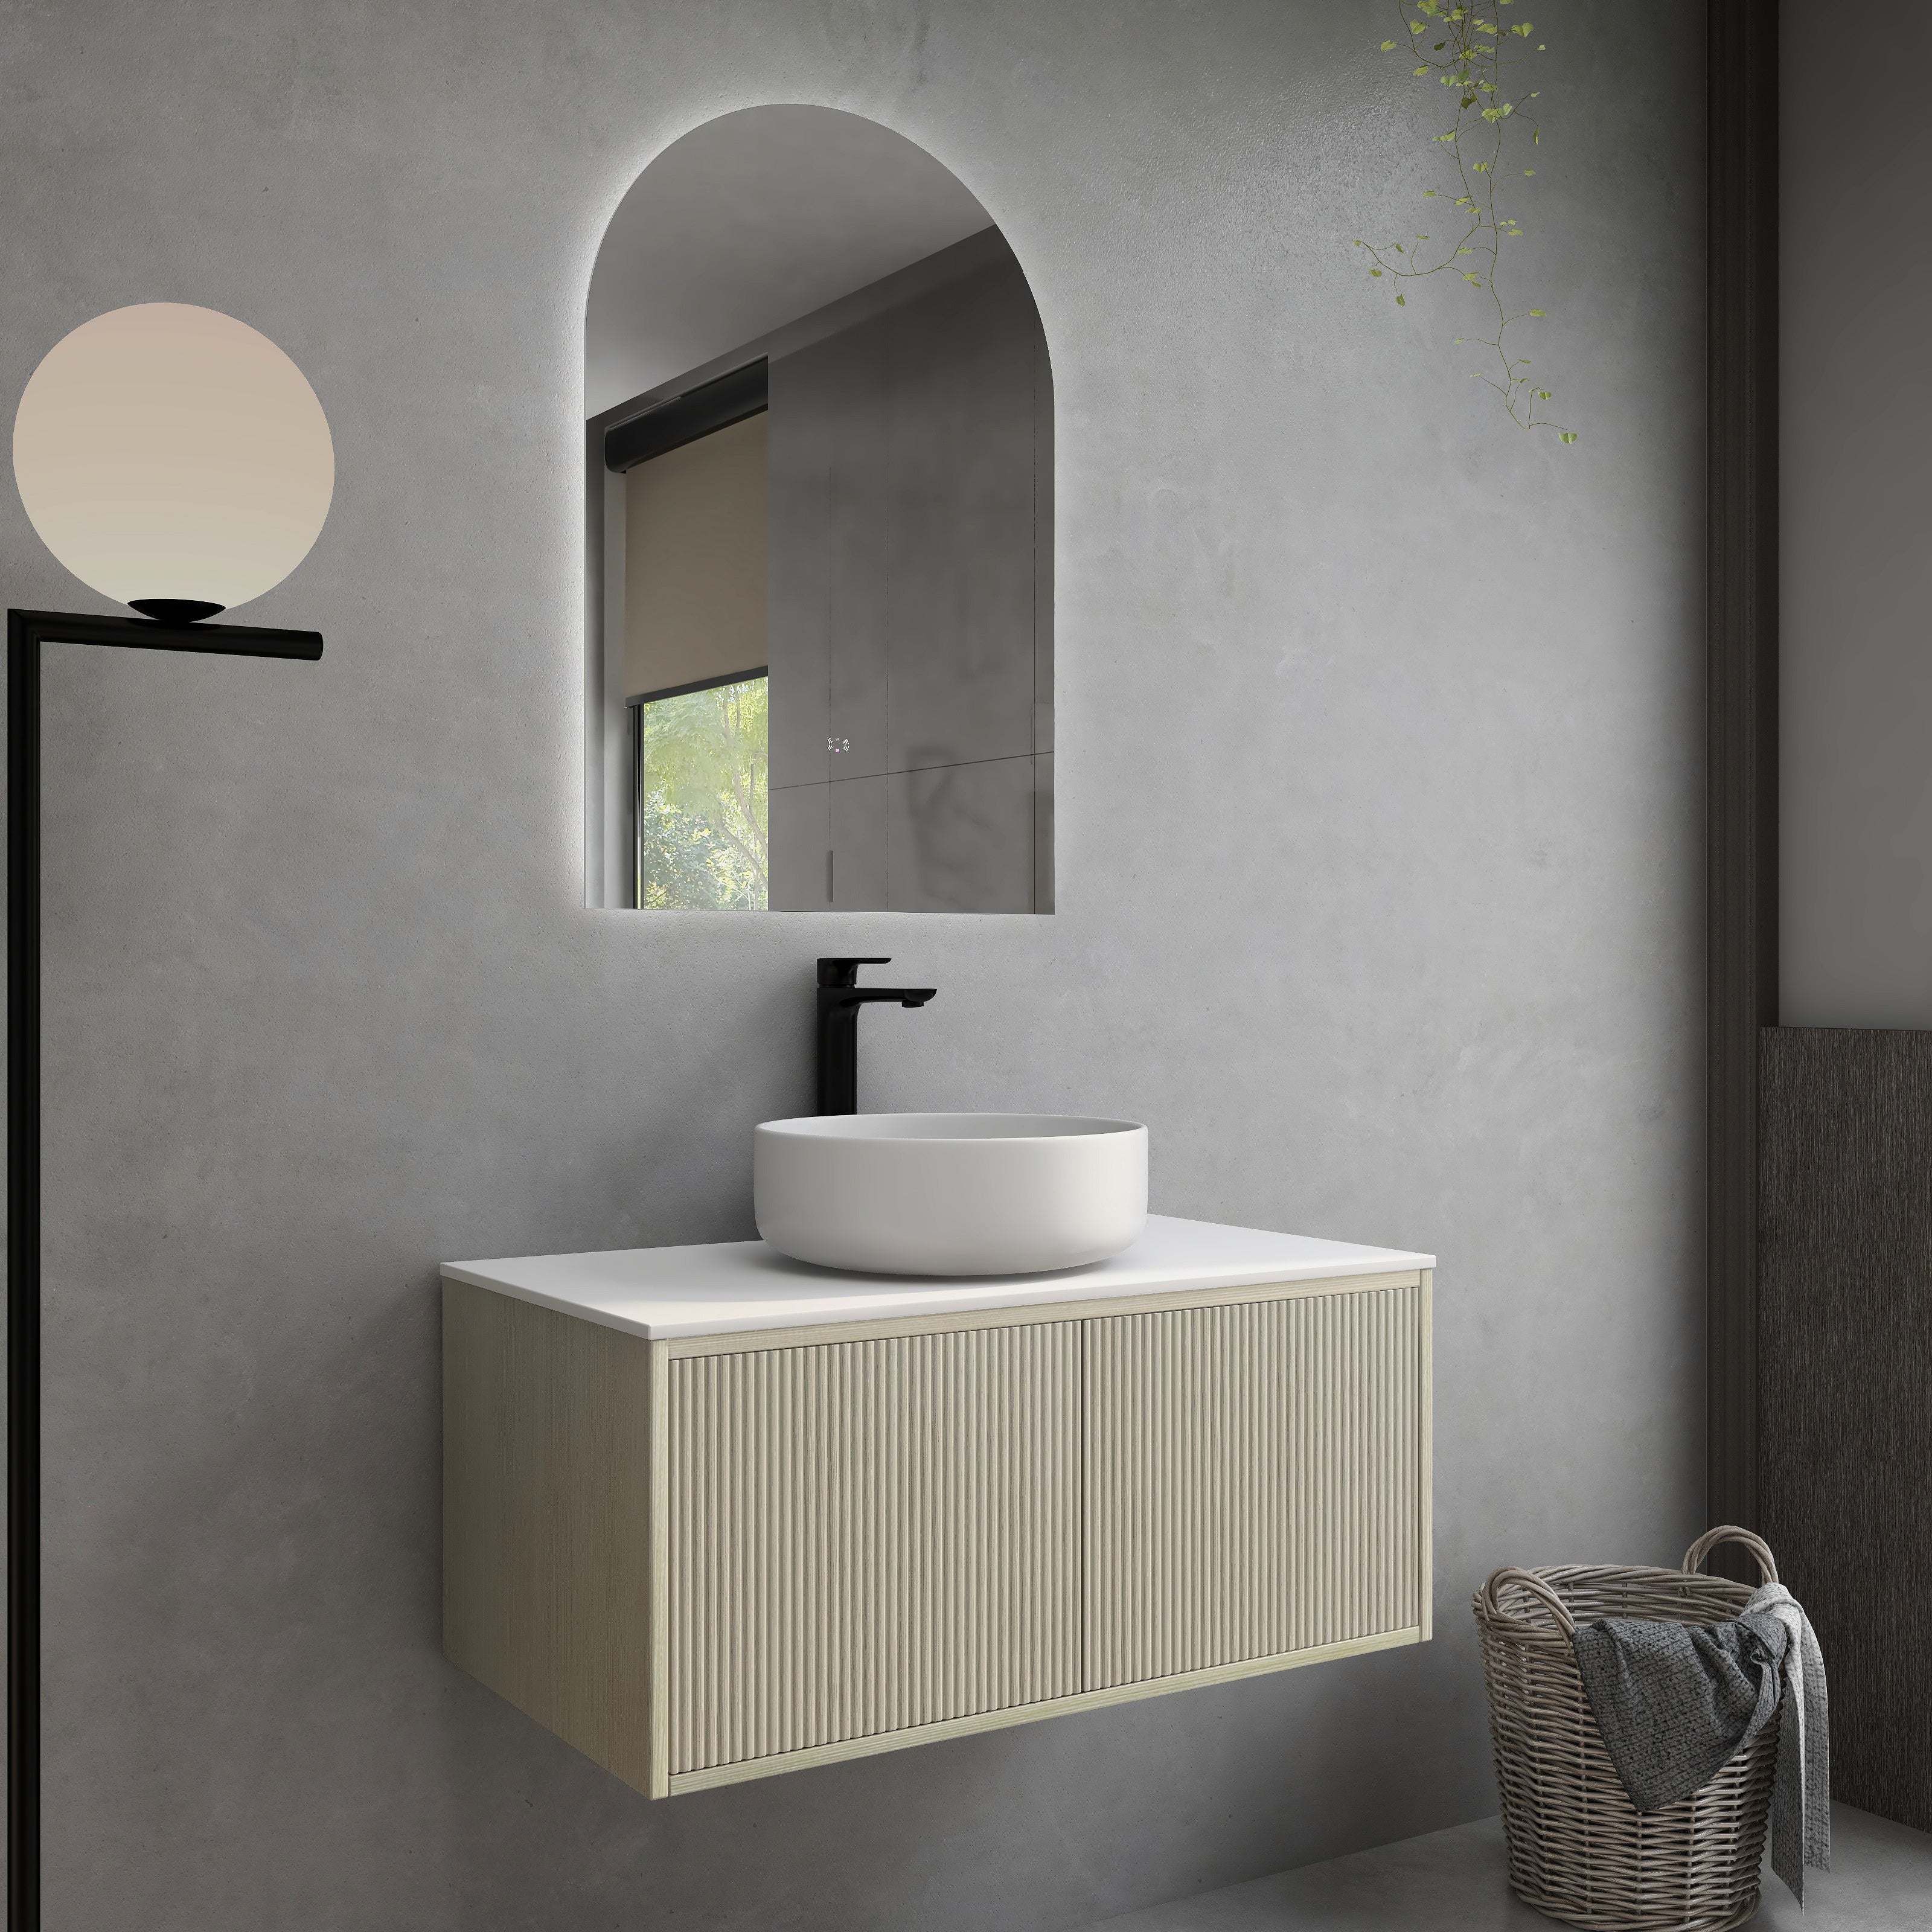 CETO BELLEVUE COASTAL OAK 900MM SINGLE BOWL WALL HUNG VANITY (AVAILABLE IN LEFT HAND DRAWER AND RIGHT HAND DRAWER)